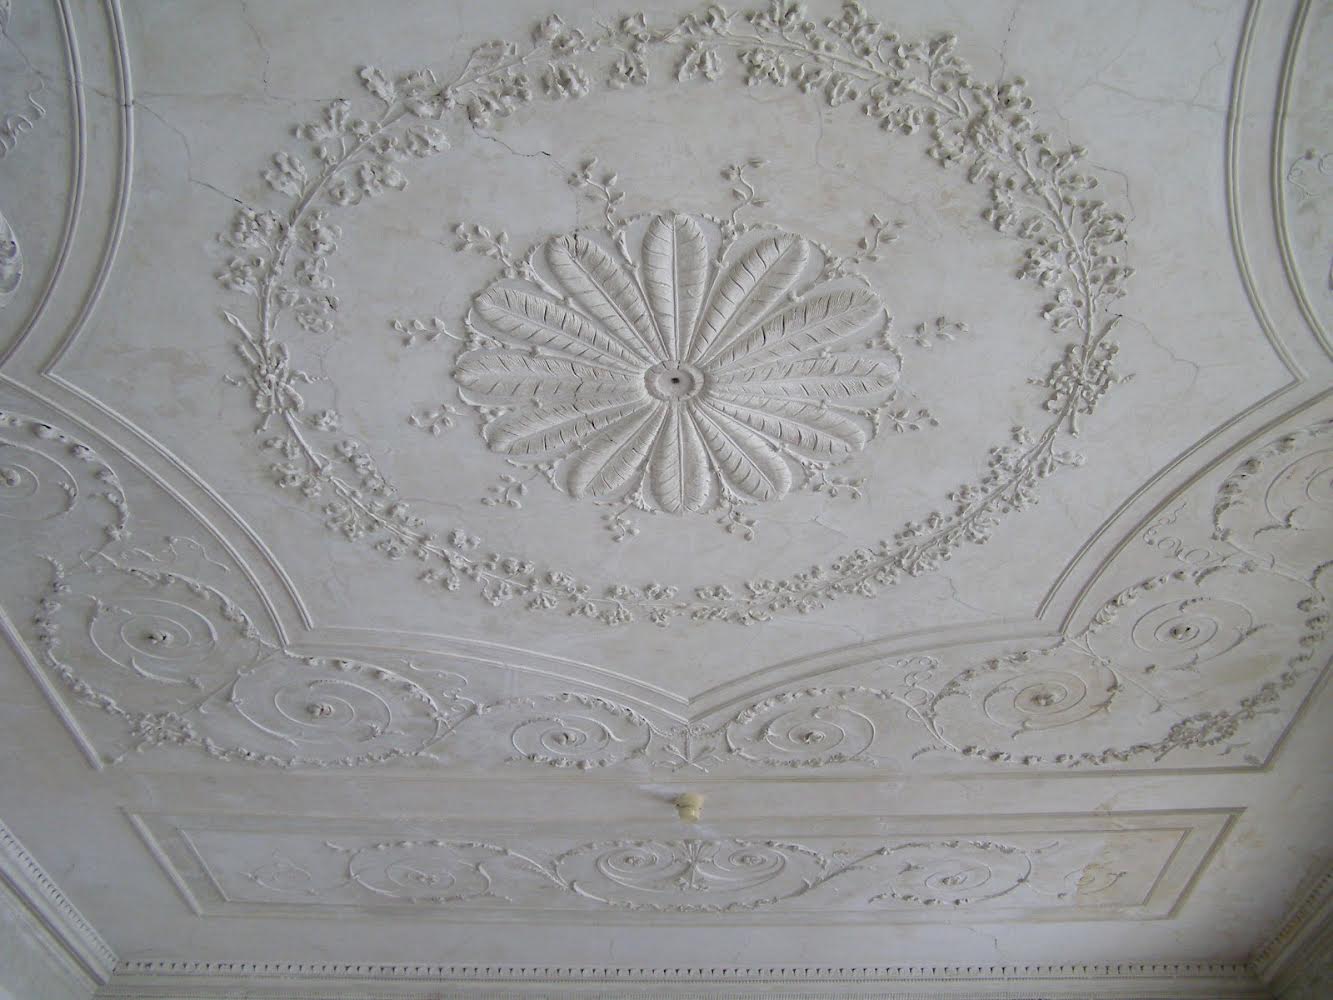 Decorated ceiling in drawing room of eighteenth century house.